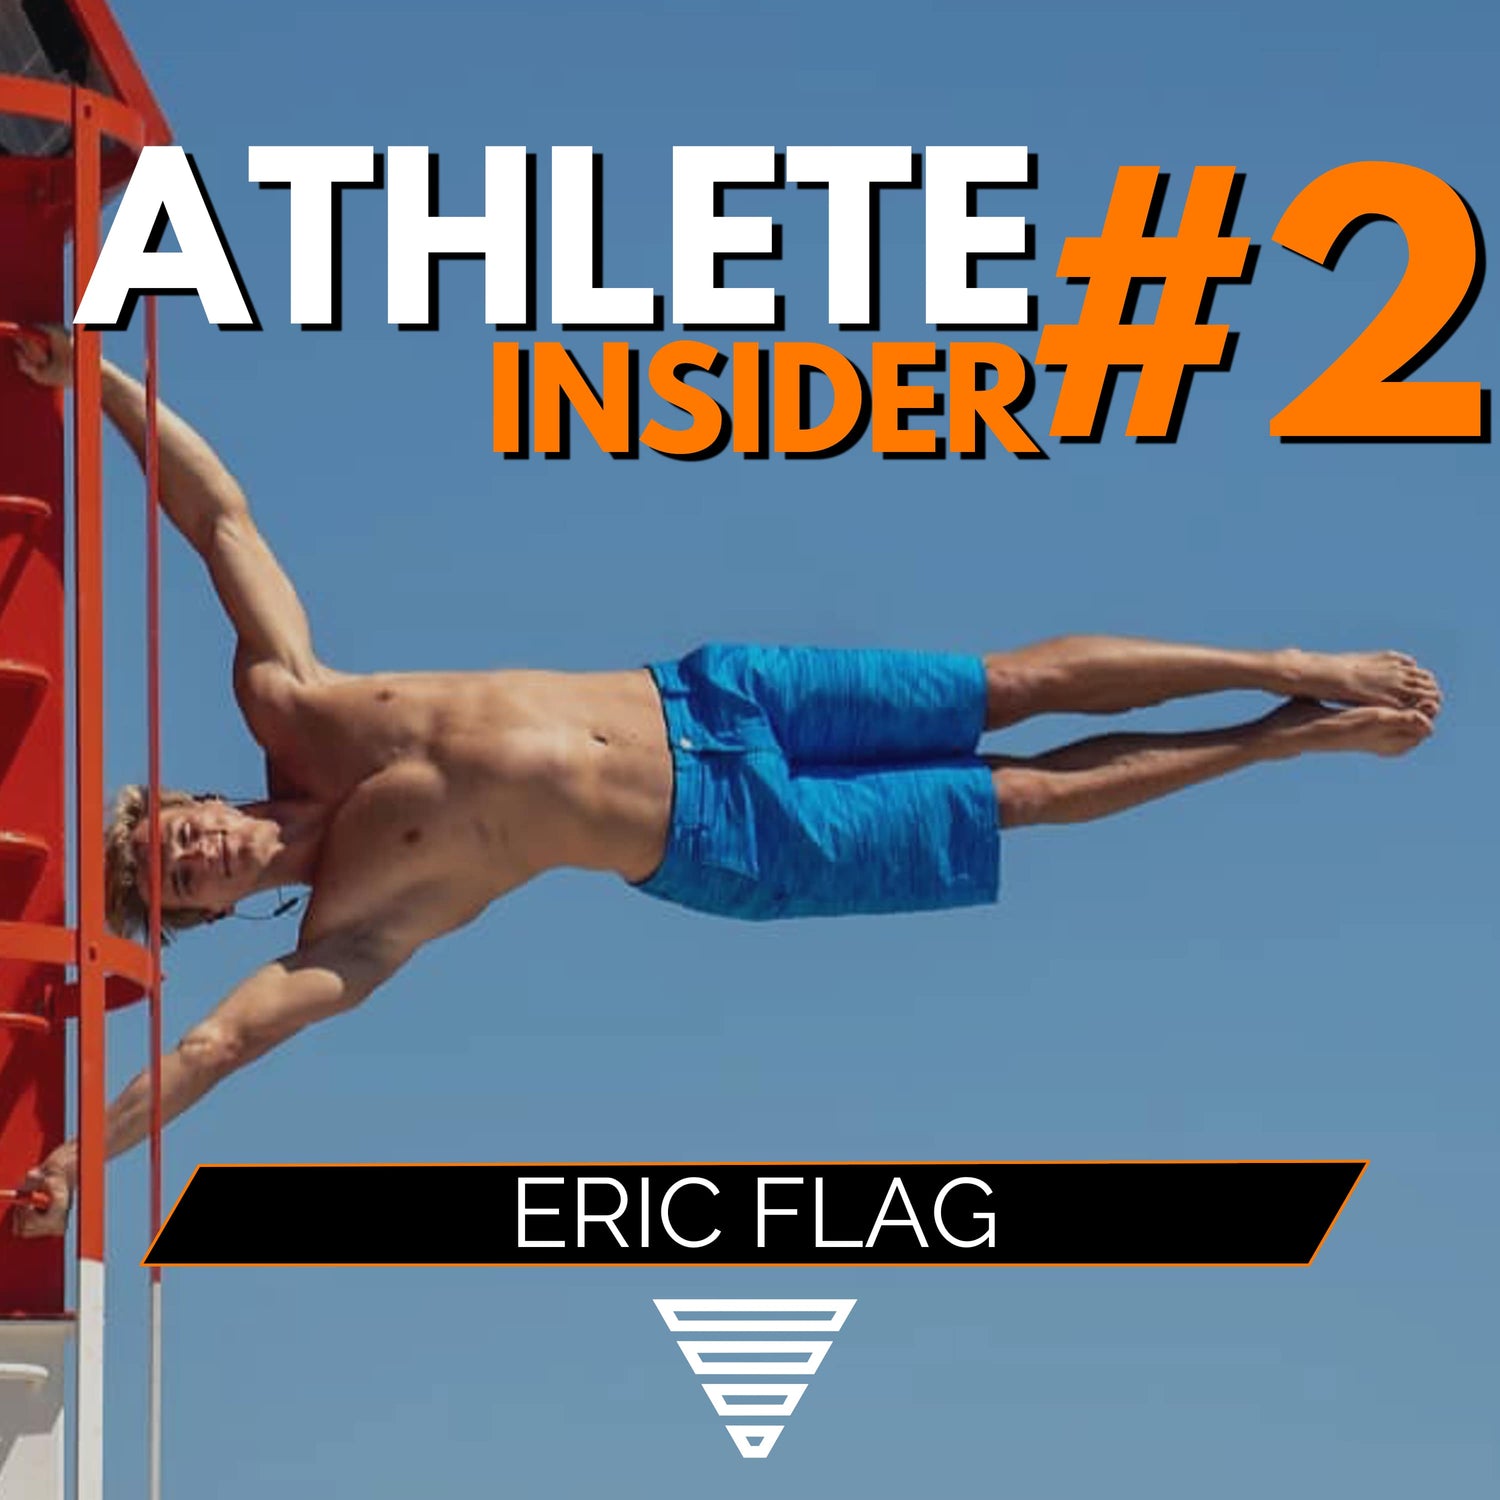 How to earn your living from YouTube & Calisthenics | Insides from ERIC FLAG | The Athlete Insider Podcast #2